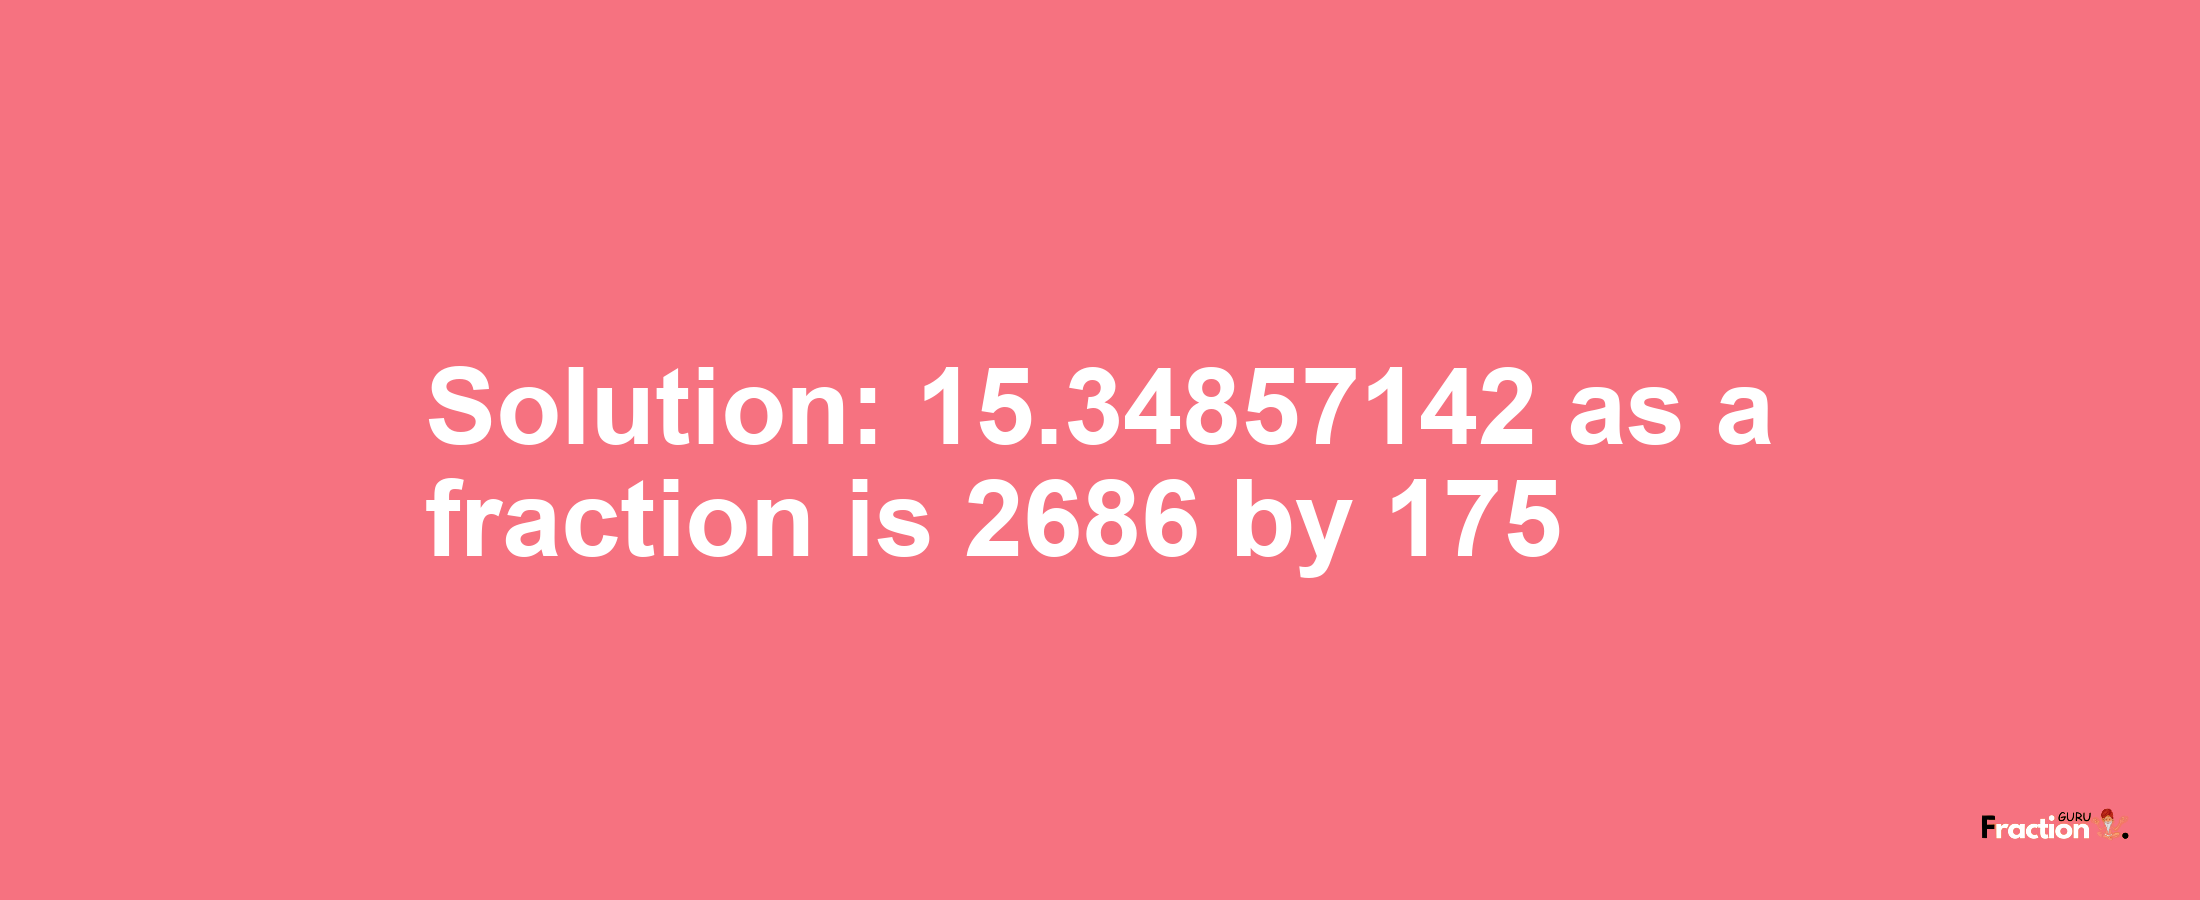 Solution:15.34857142 as a fraction is 2686/175